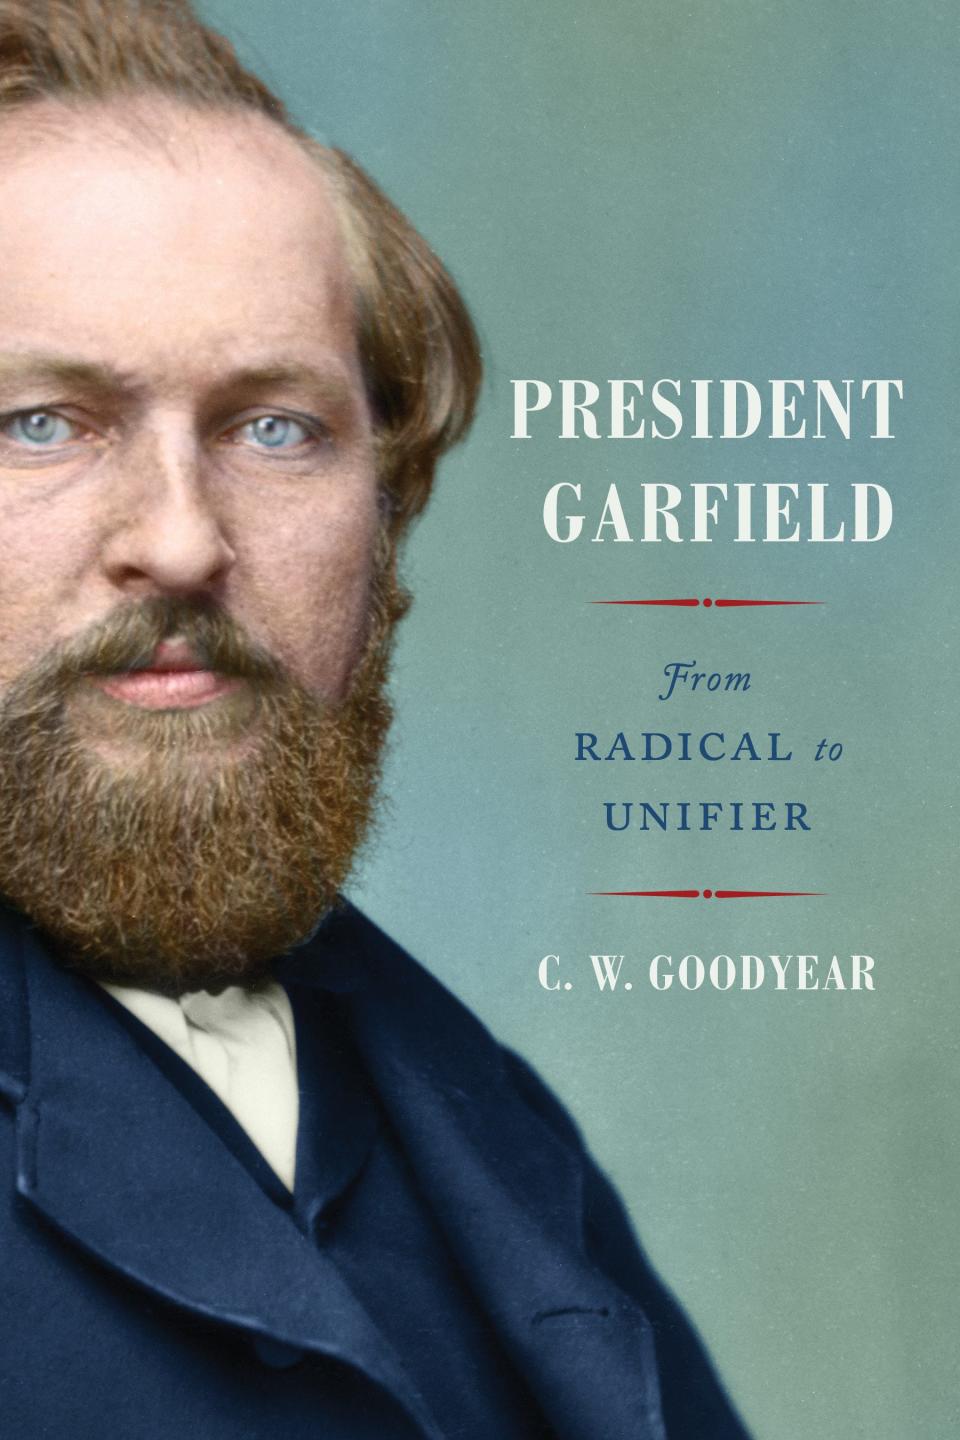 “President Garfield: From Radical to Unifier” by C.W. Goodyear shines a spotlight on James Garfield and the politics of the Reconstruction Era that has parallels to today.